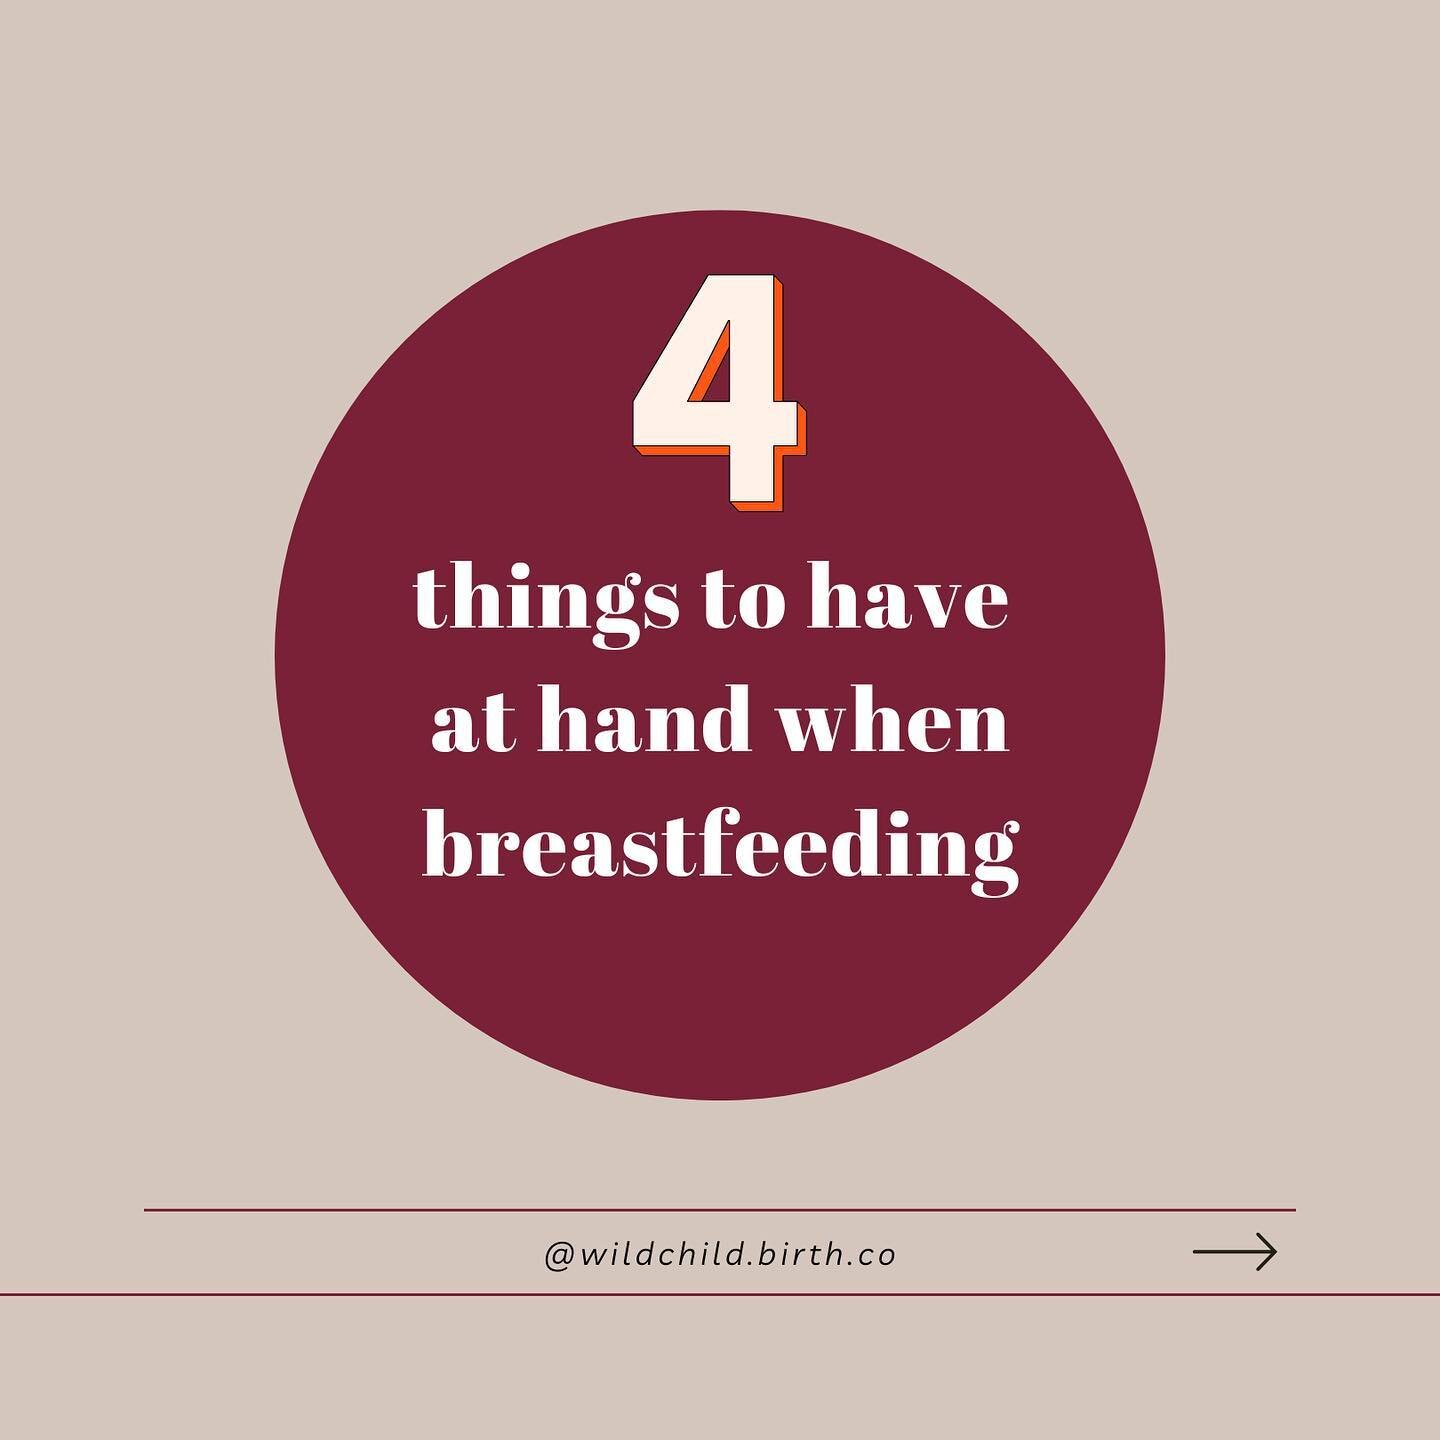 Save this one! 

Grab these 4 things (or have someone gather them for you) for breastfeeding sessions. 

This is especially helpful if you&rsquo;re home alone. They&rsquo;ll make your life easier so you can settle in for a short or long session.

Wha